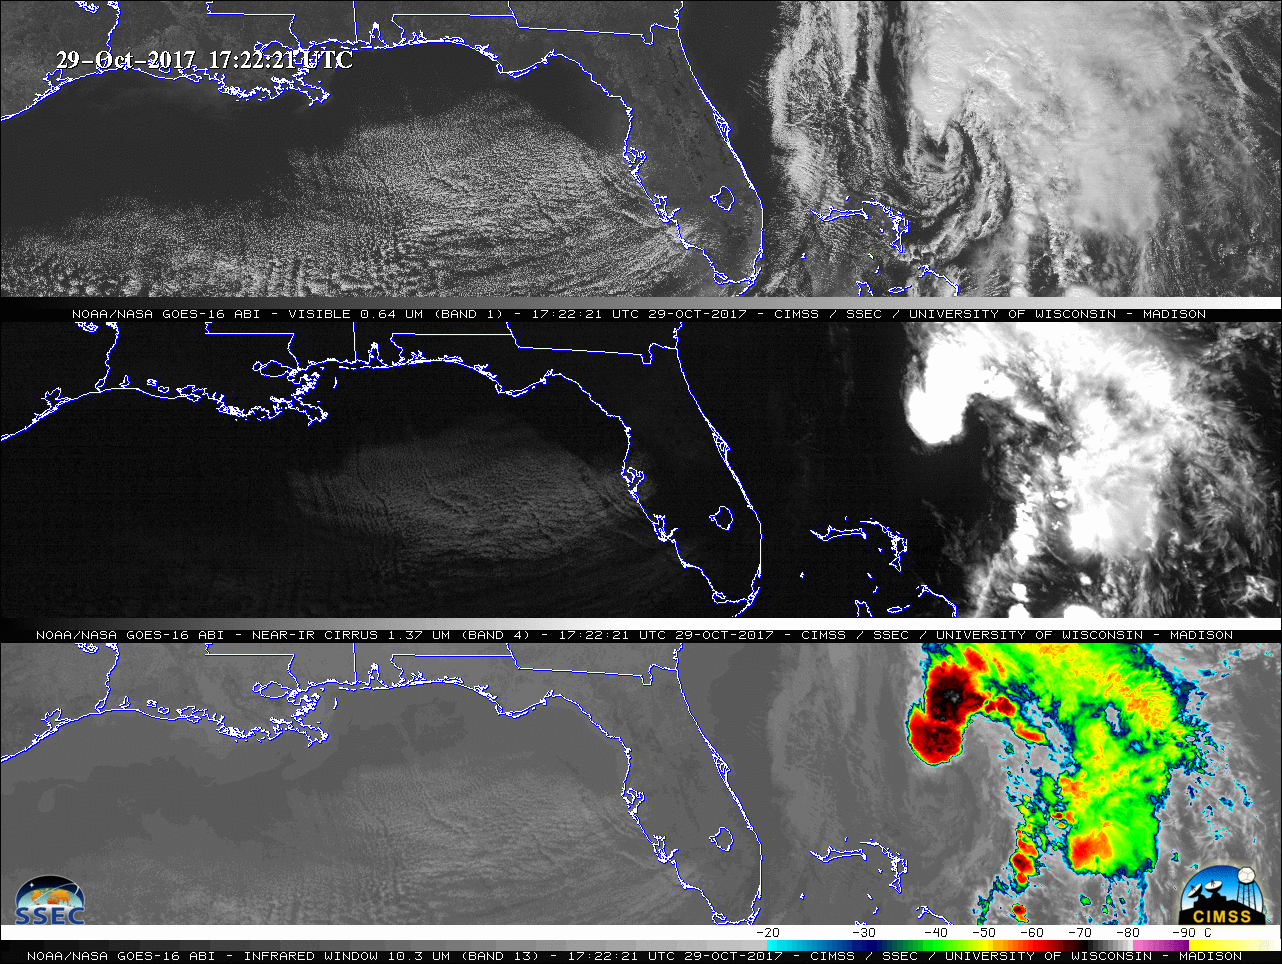 GOES-16 Visible (0.64 µm, top), Cirrus (1.37 µm, middle) and Infrared Window (10.3 µm, bottom) images [click to play animation]